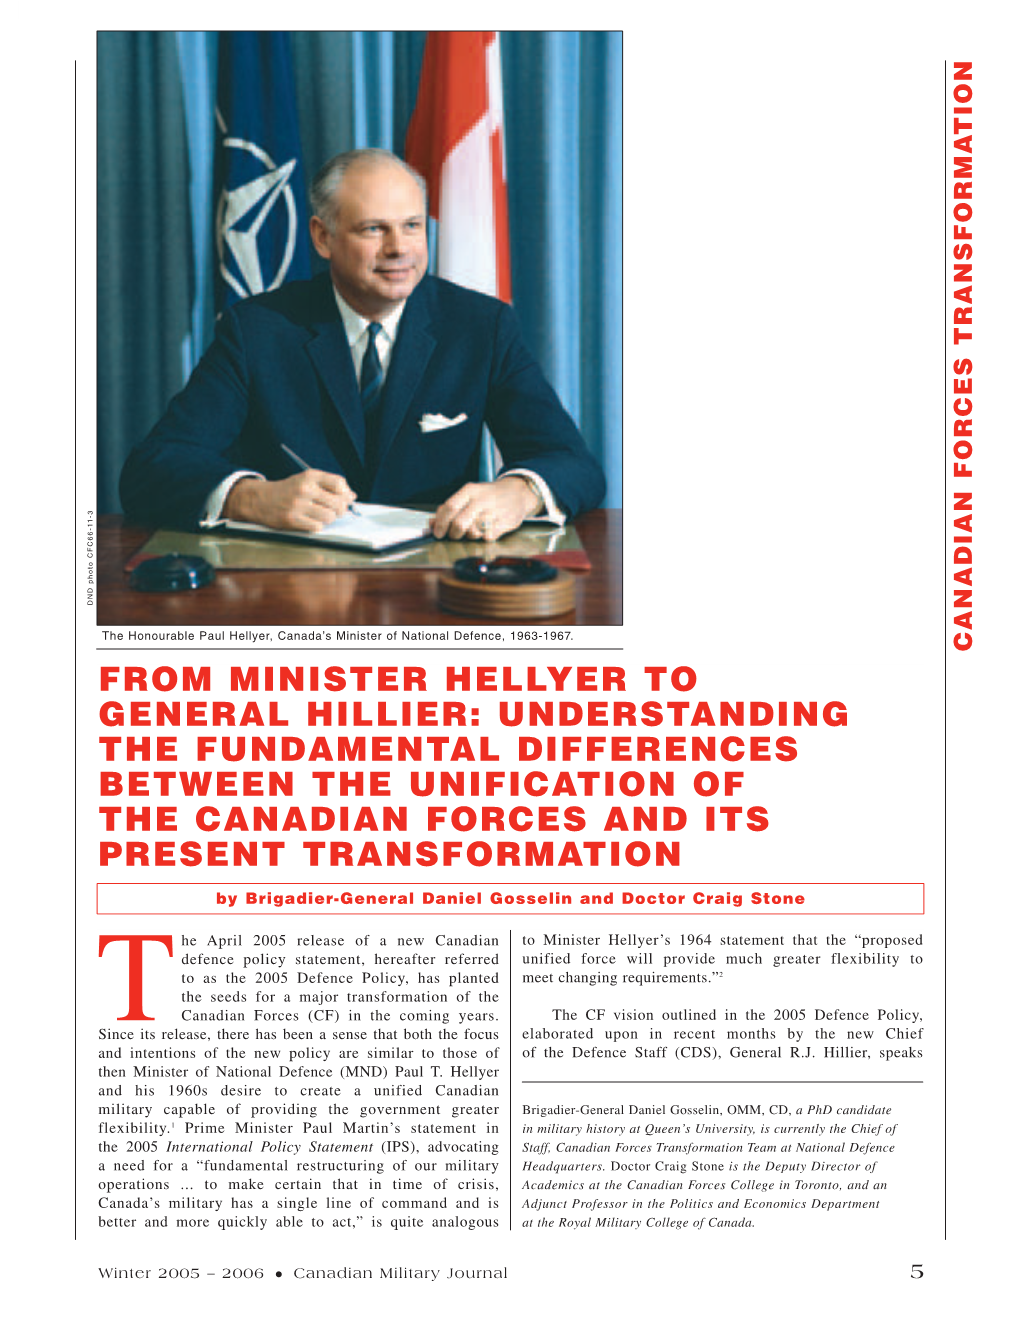 From Minister Hellyer to General Hillier: Understanding the Fundamental Differences Between the Unification of the Canadian Forces and Its Present Transformation